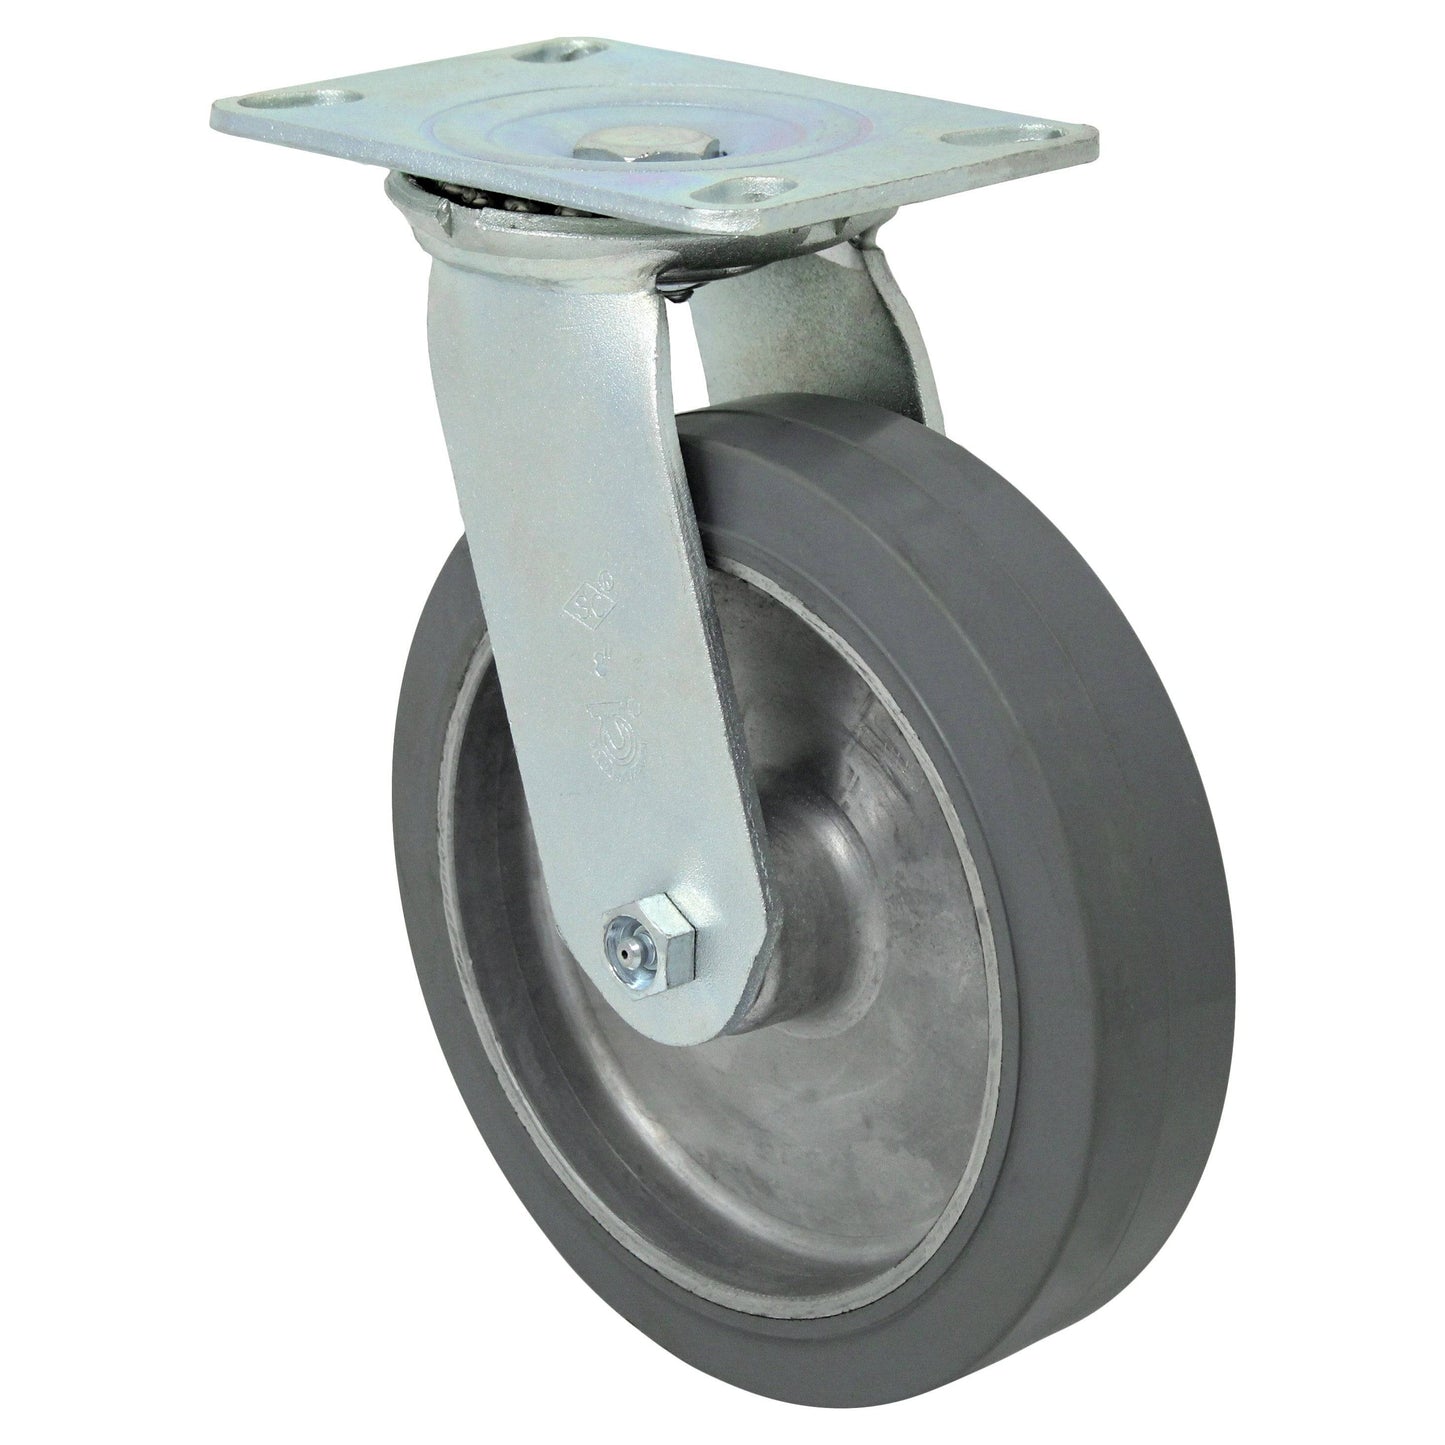 8" x 2" Mold On Rubber Aluminum Wheel Swivel Caster - 600 lbs. Capacity - Durable Superior Casters